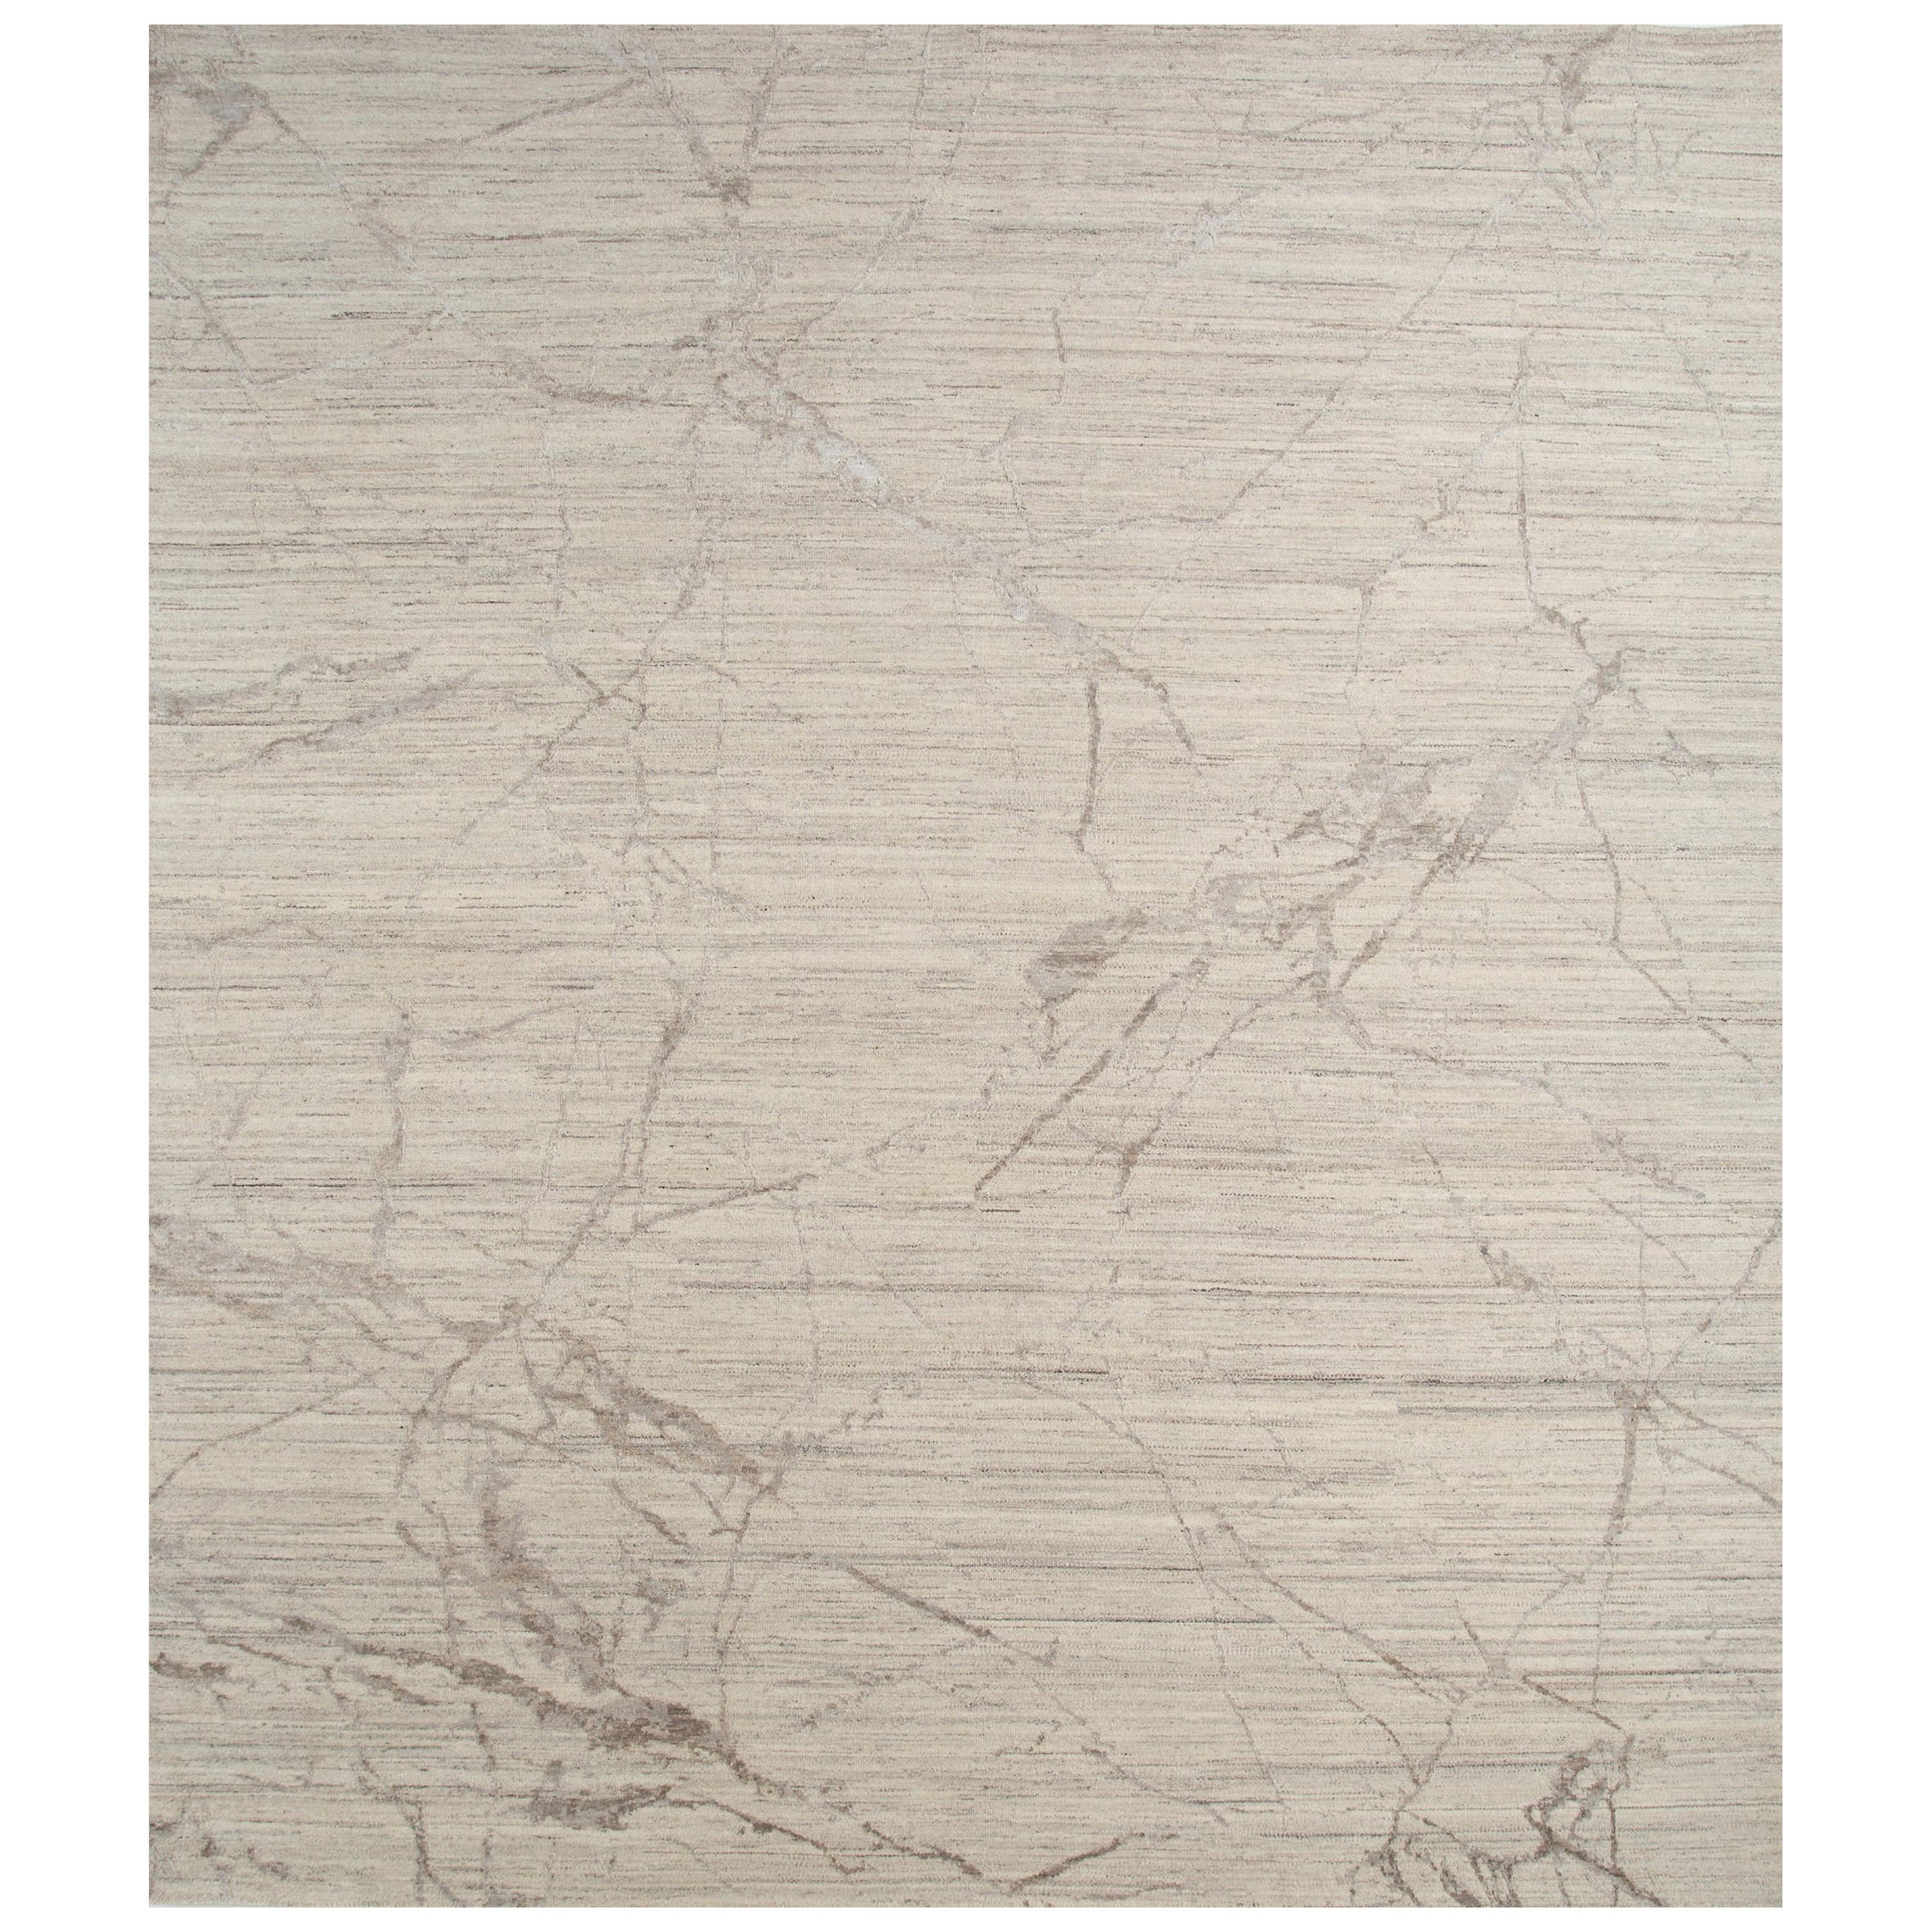 Tranquil haven white chalk & shale 240X300 cm Handknotted rug